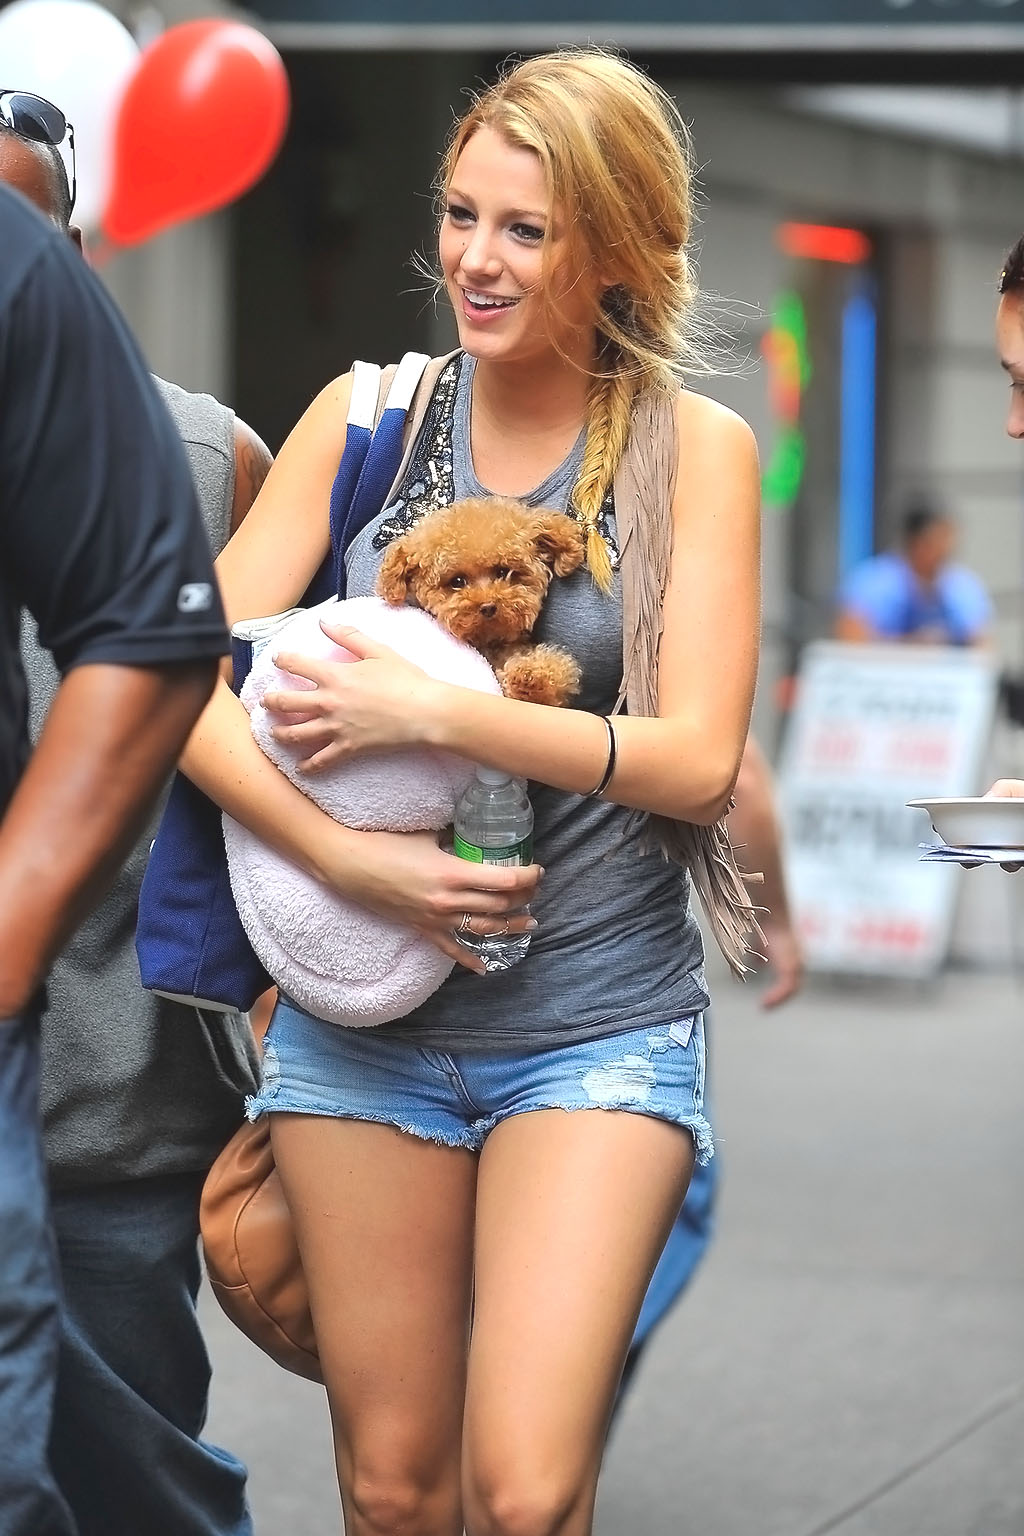 Blake Lively on the sets of GOSSIP GIRL on August 6, 2009 in NY